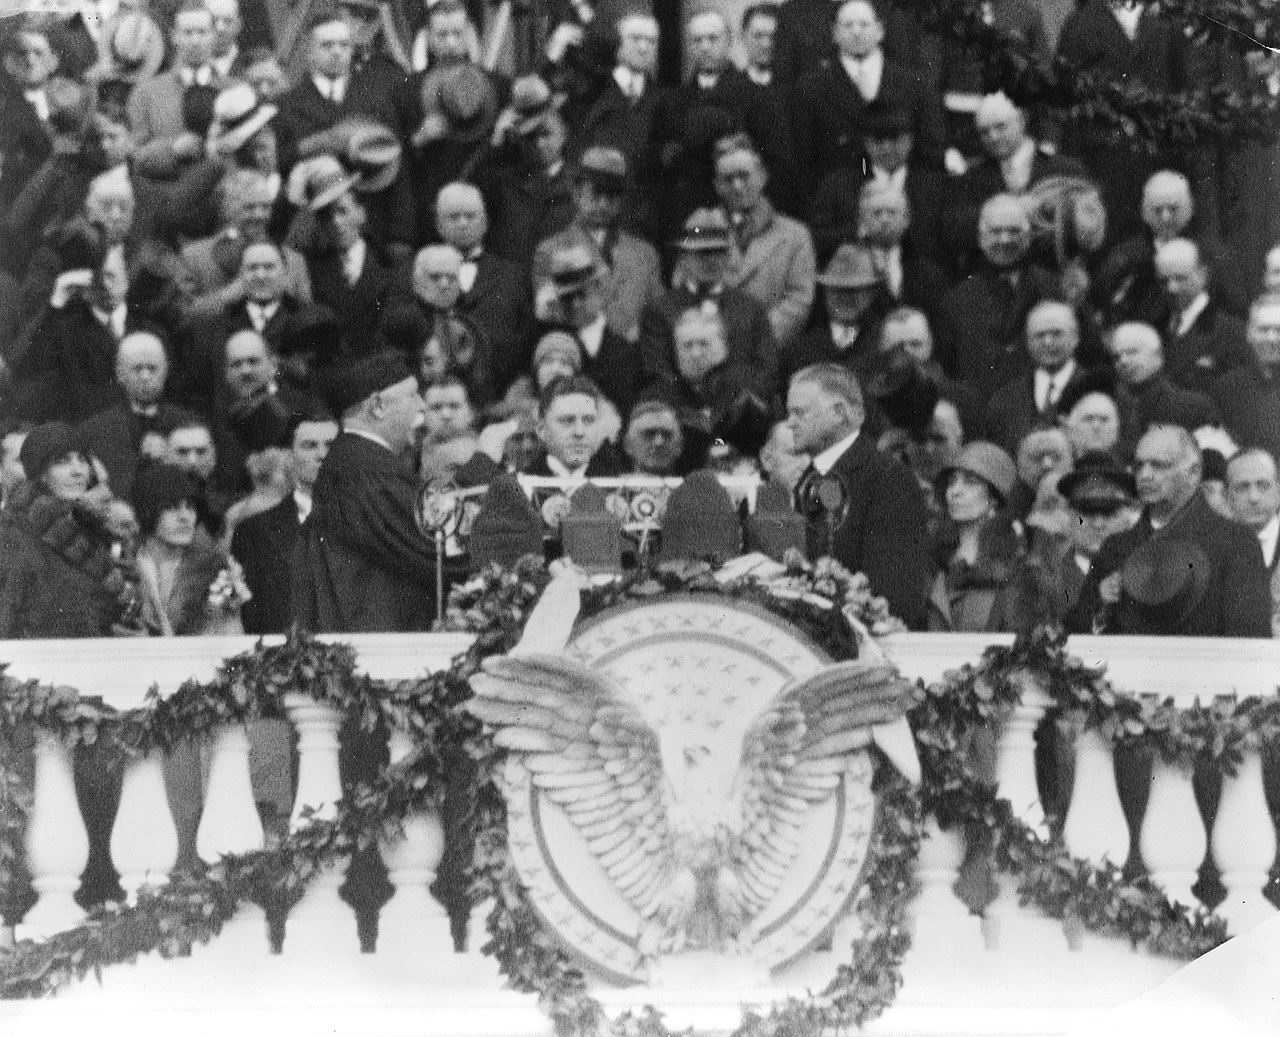 Hoover's inauguration